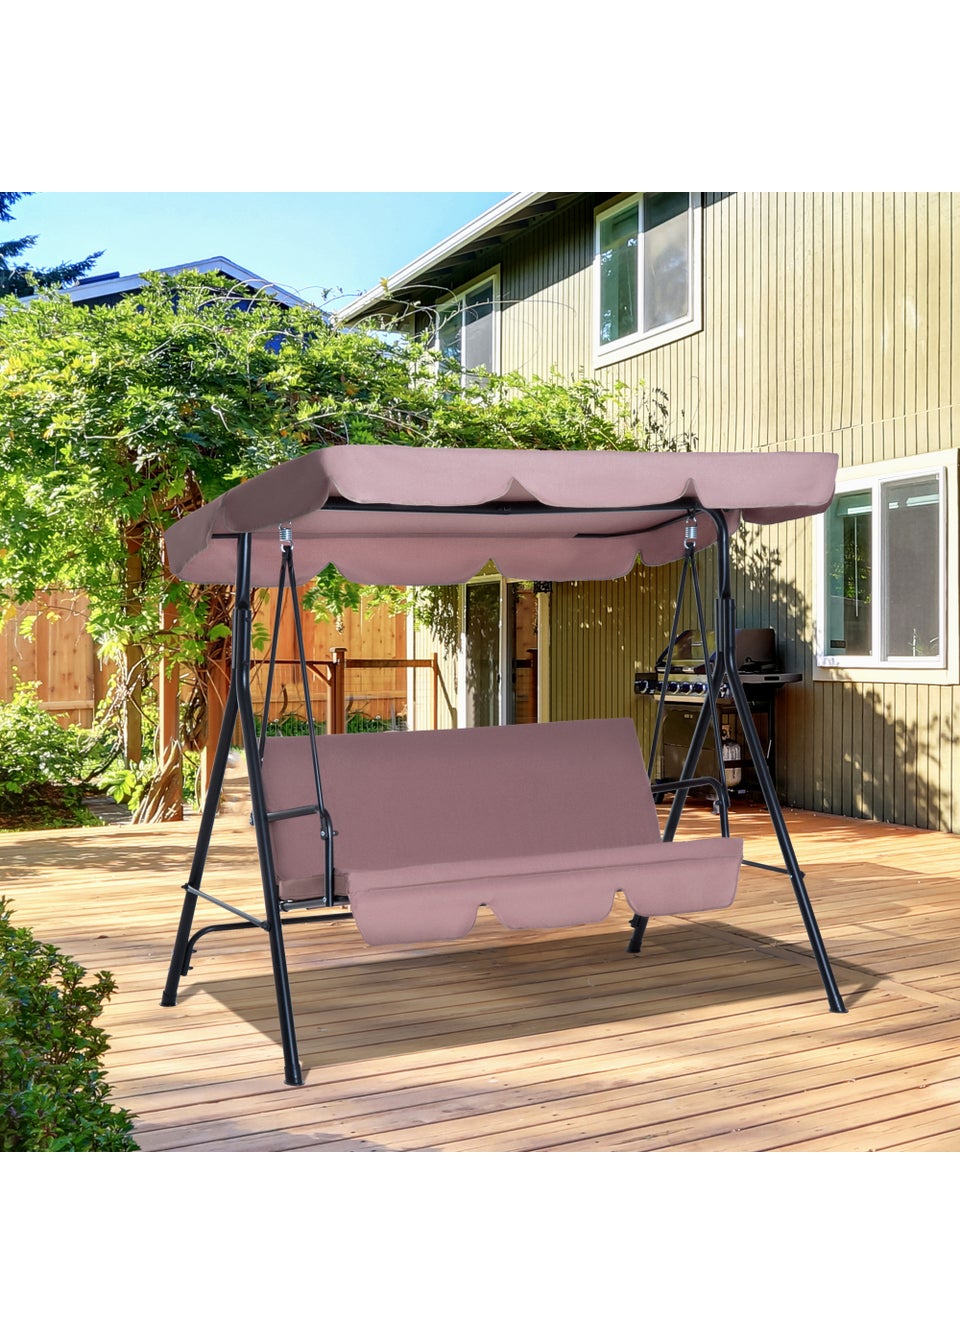 Outsunny Outdoor 3 Seat Canopy Swing Chair (172cm x 110cm x 153cm)